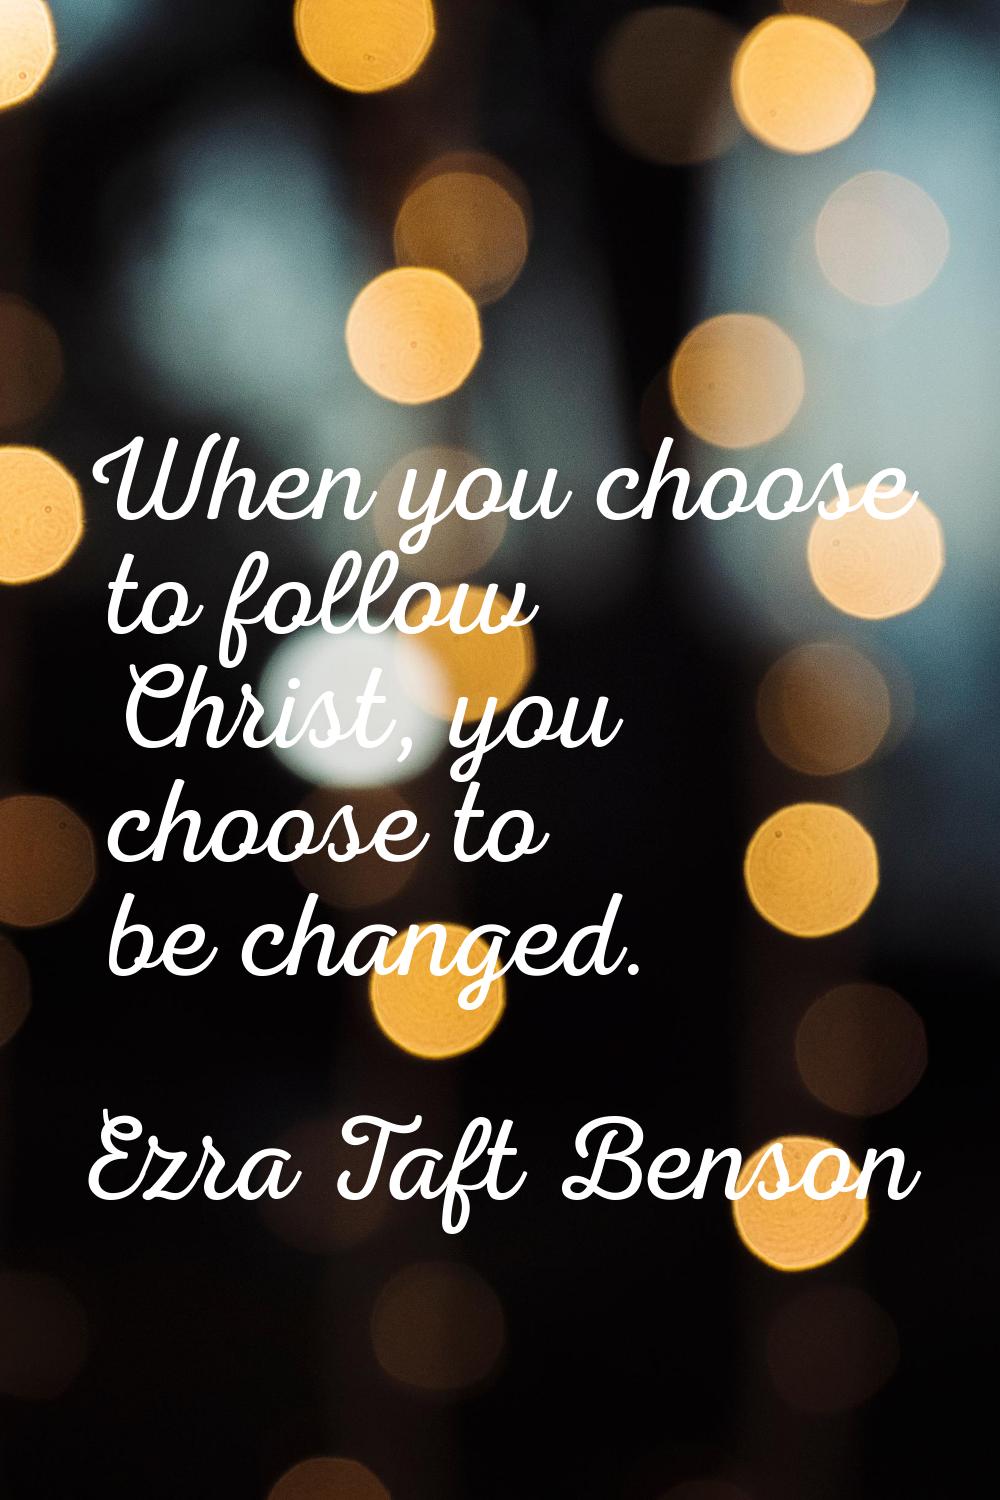 When you choose to follow Christ, you choose to be changed.